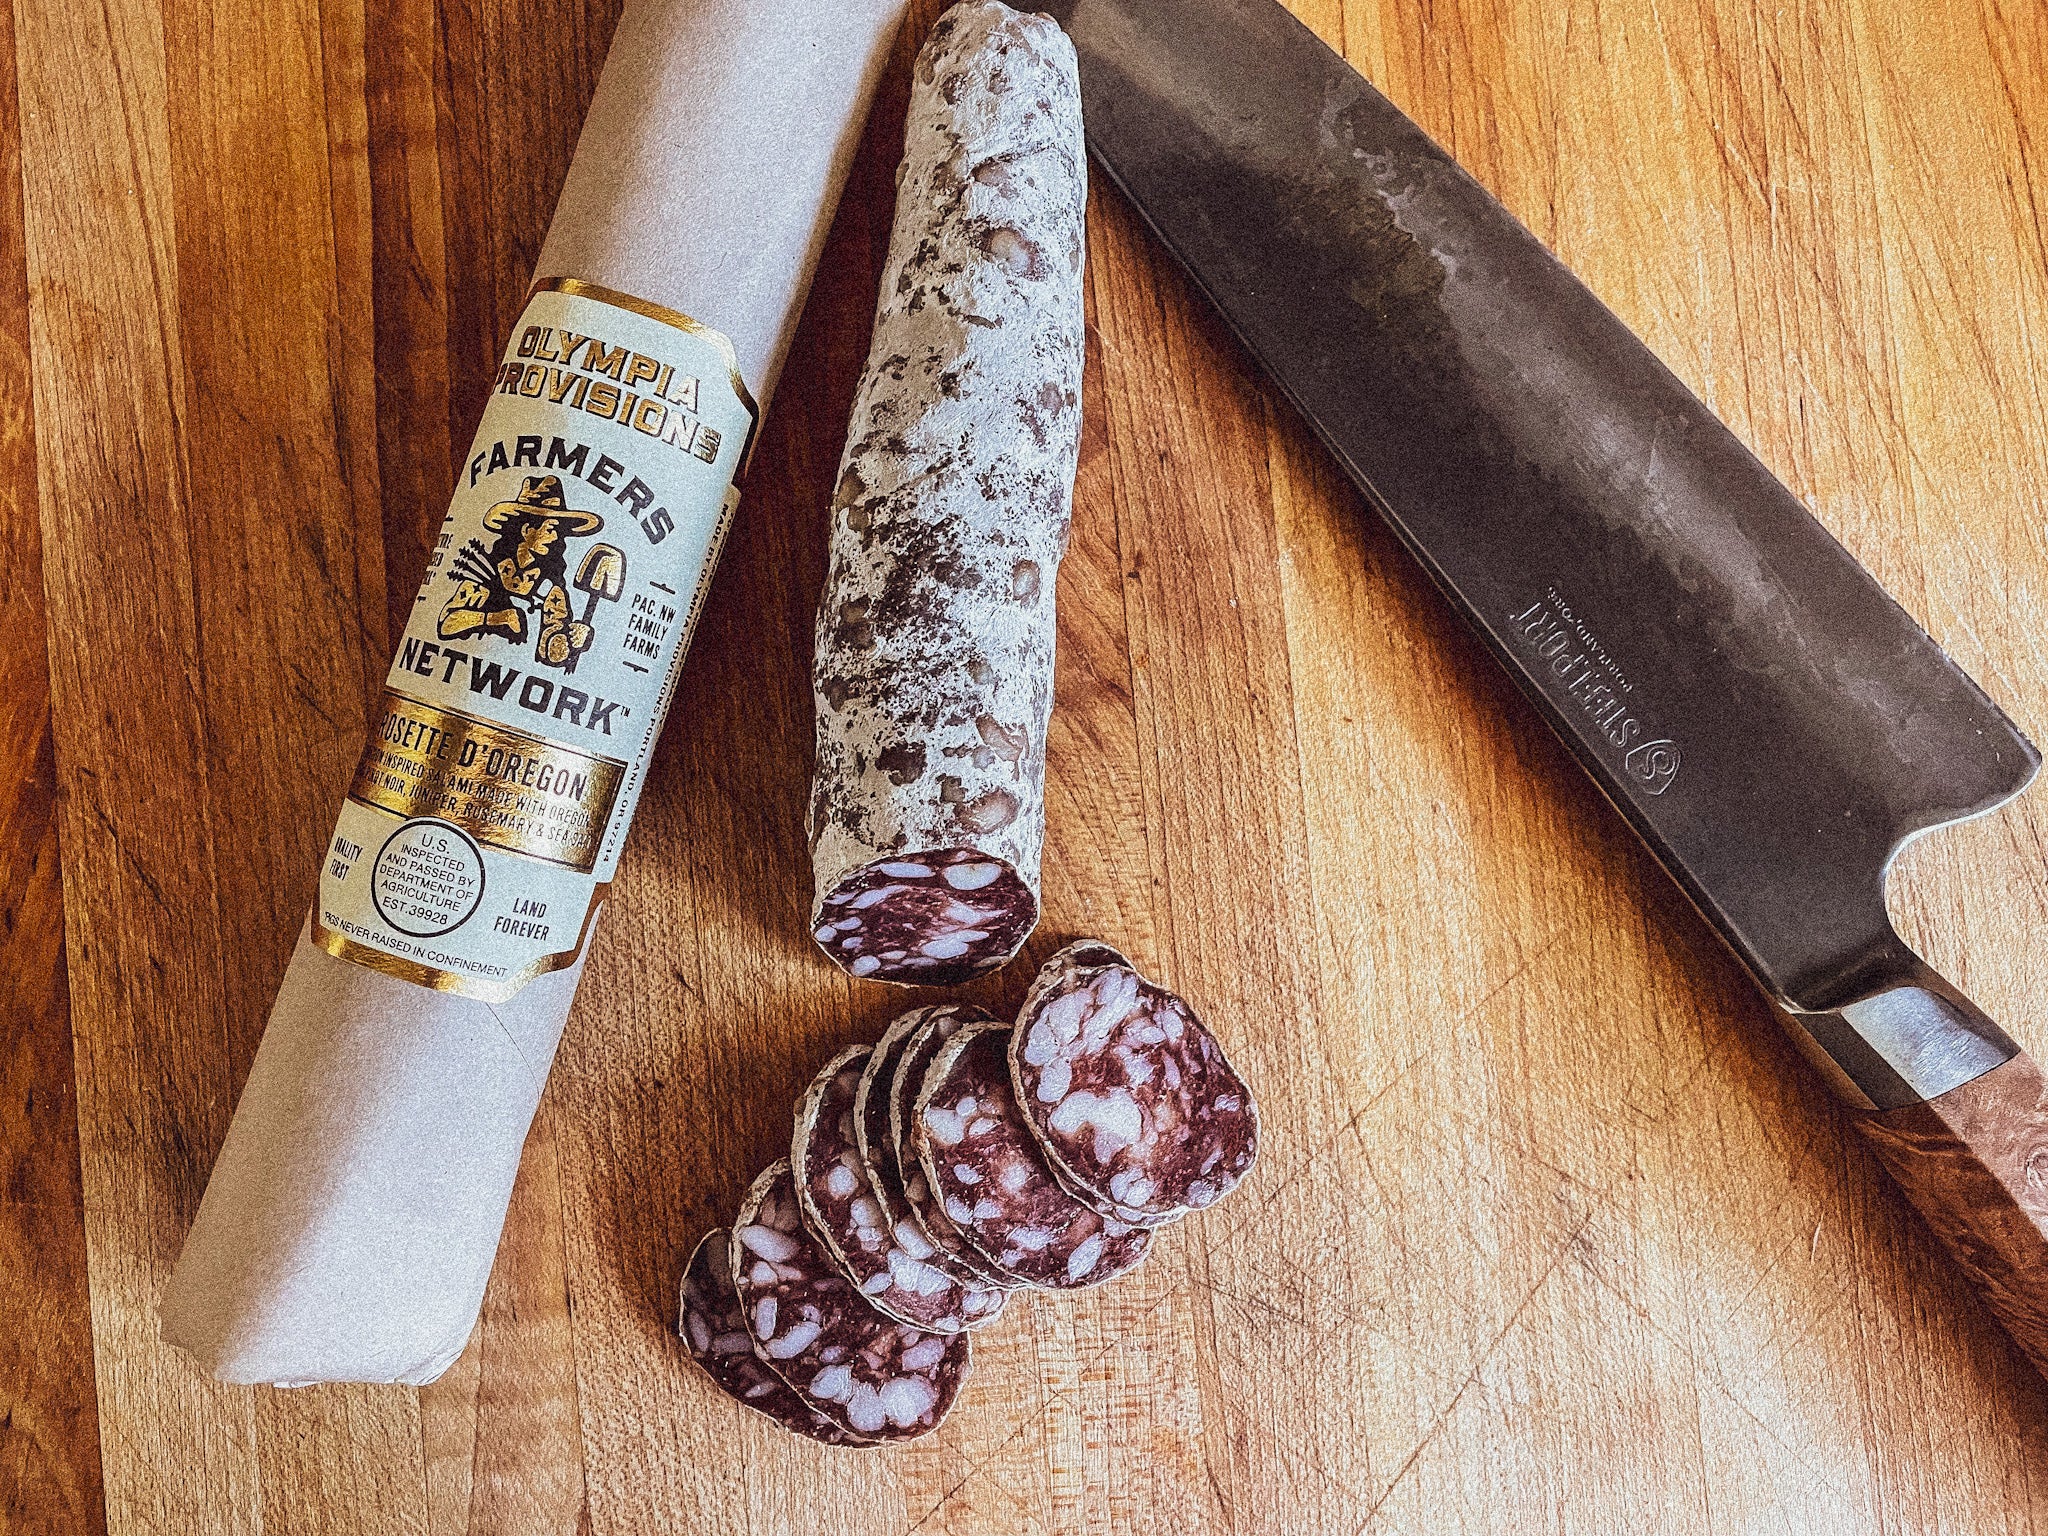 Rosette d'Oregon | NW Farmers Network Salami – Olympia Provisions